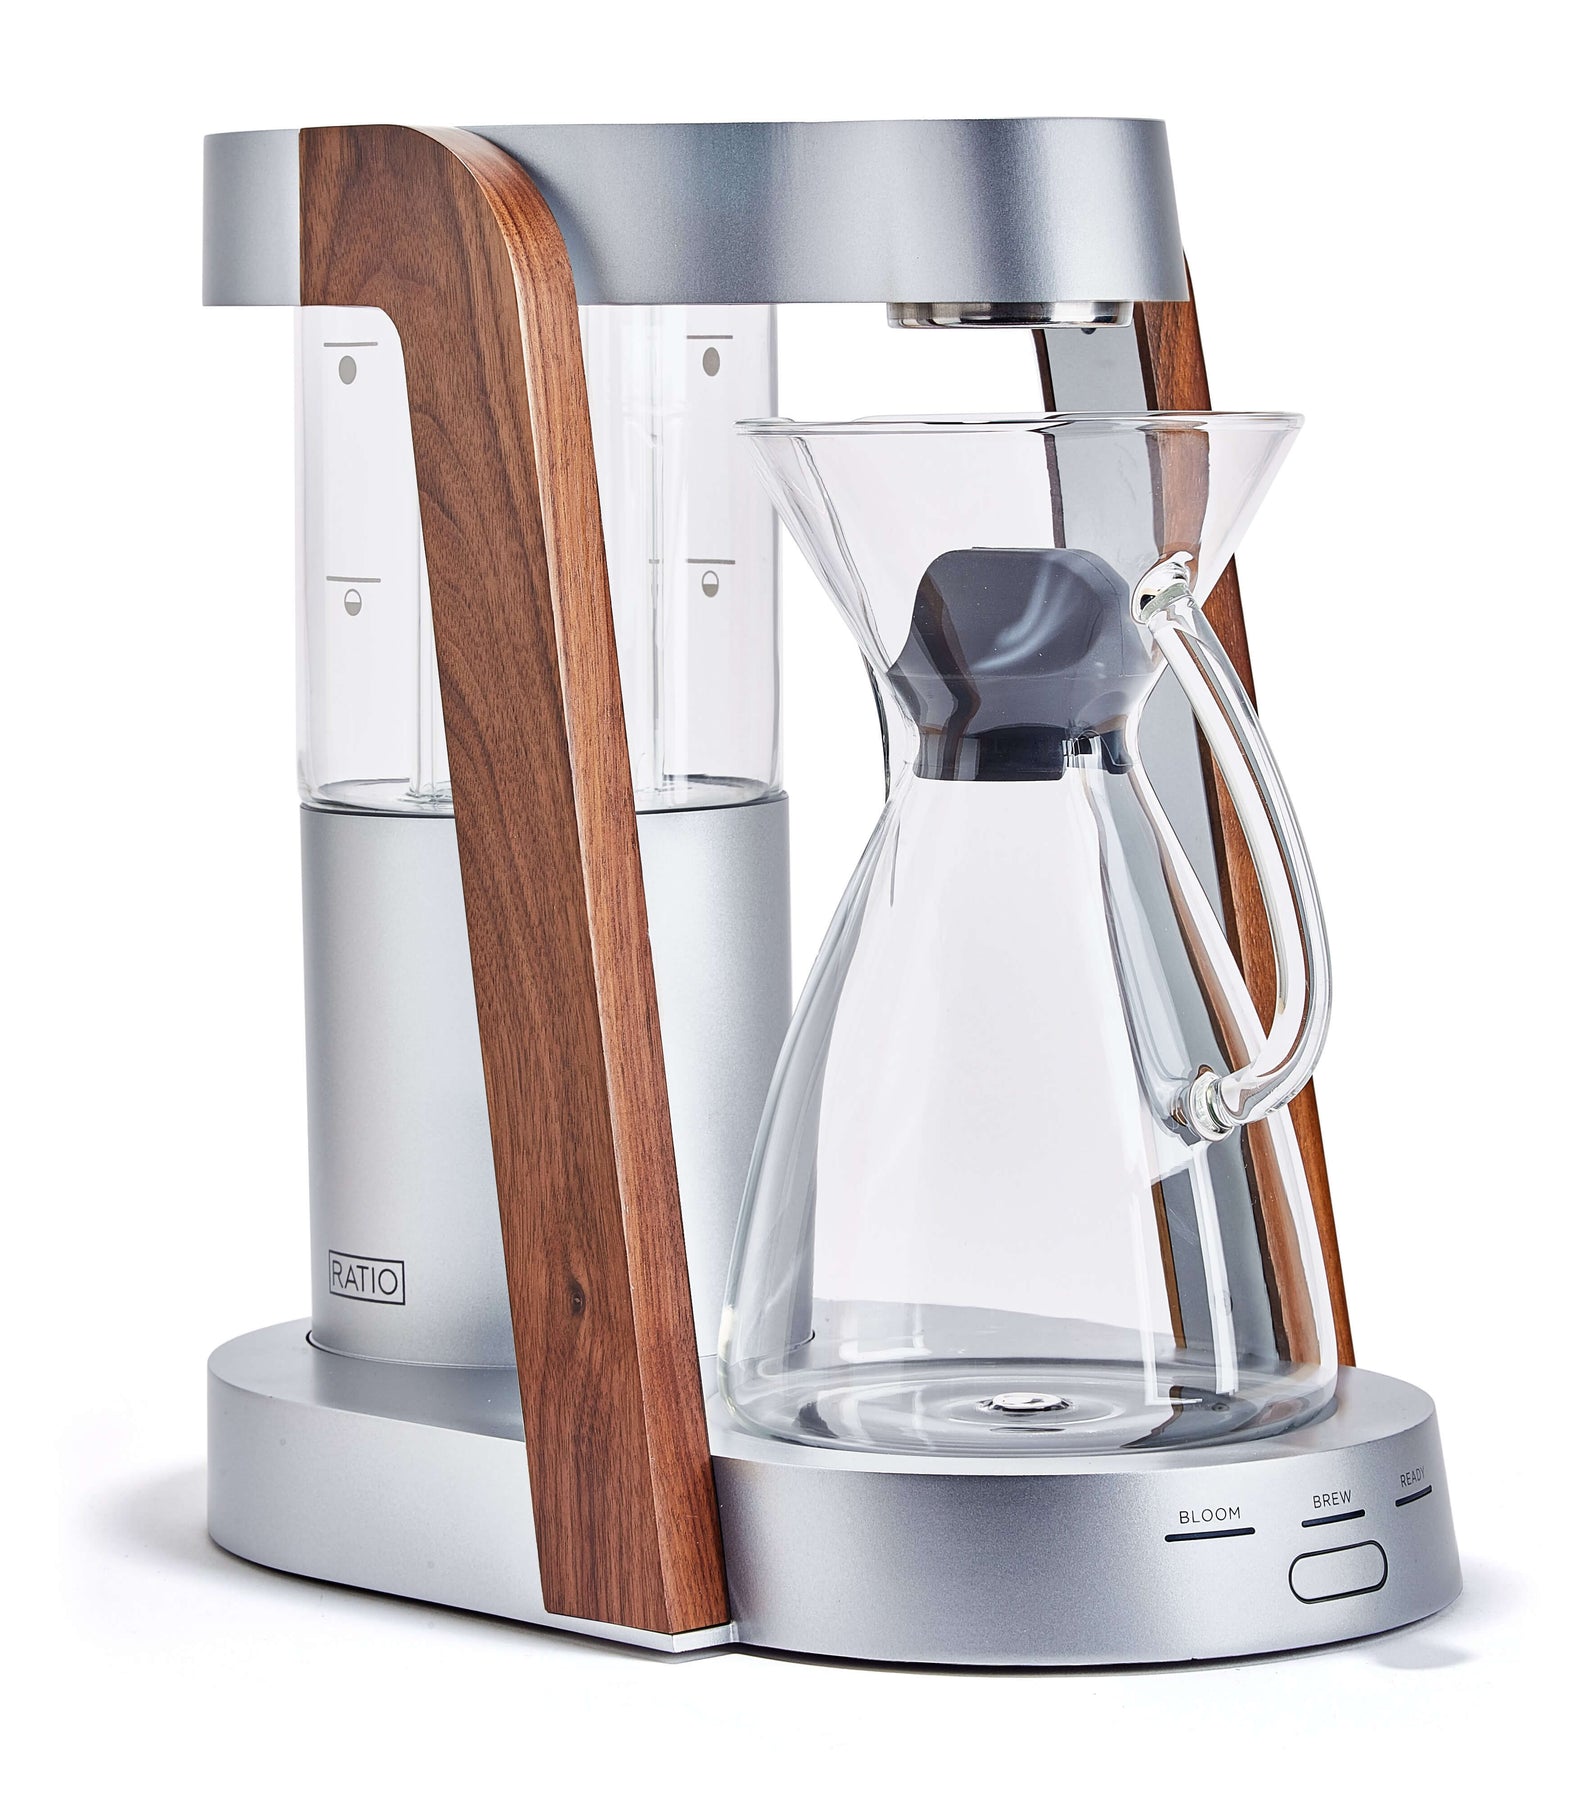 Ratio Eight review: A stunningly beautiful coffeemaker saddled